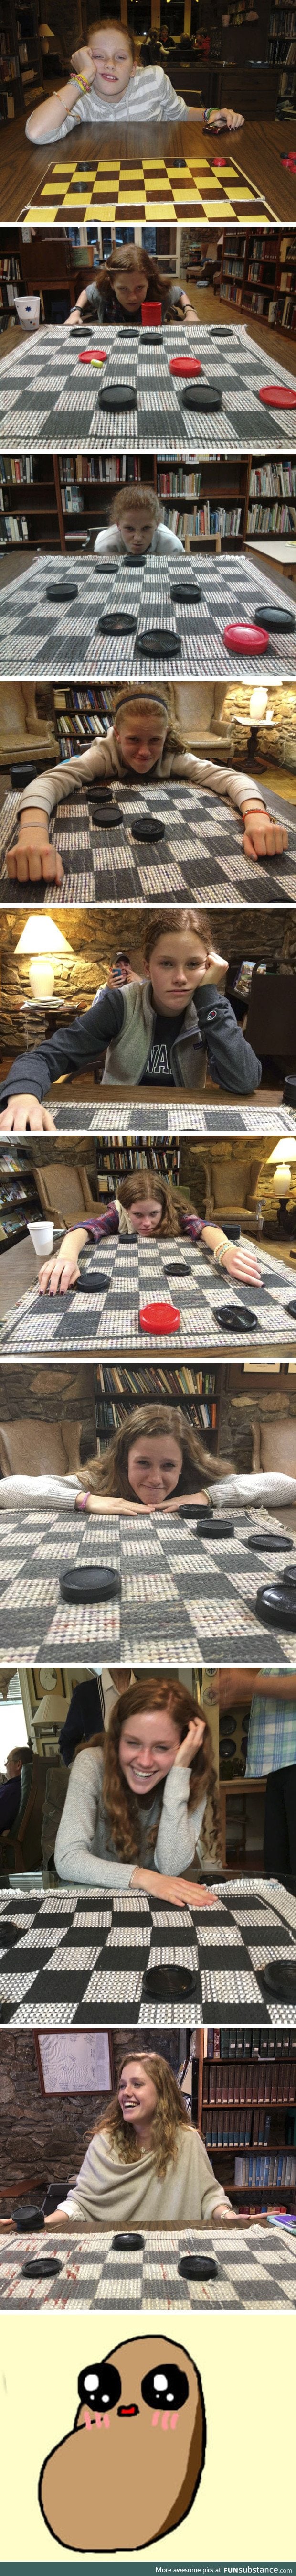 He's Been Documenting His Cousin Being Defeated On Checkers On Thanksgiving